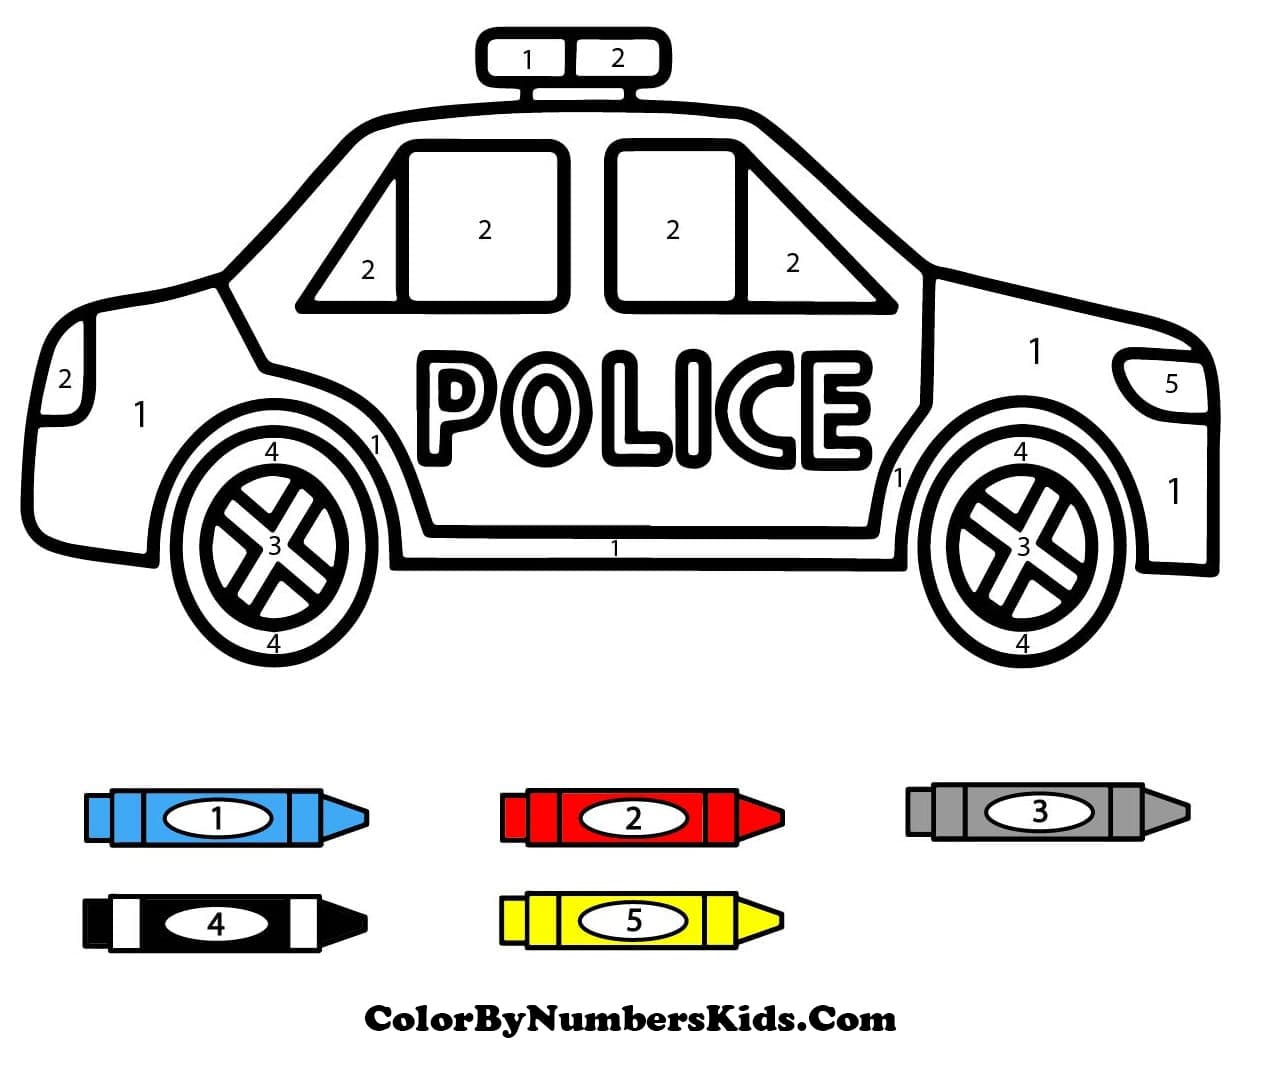 A Police Car Color By Number